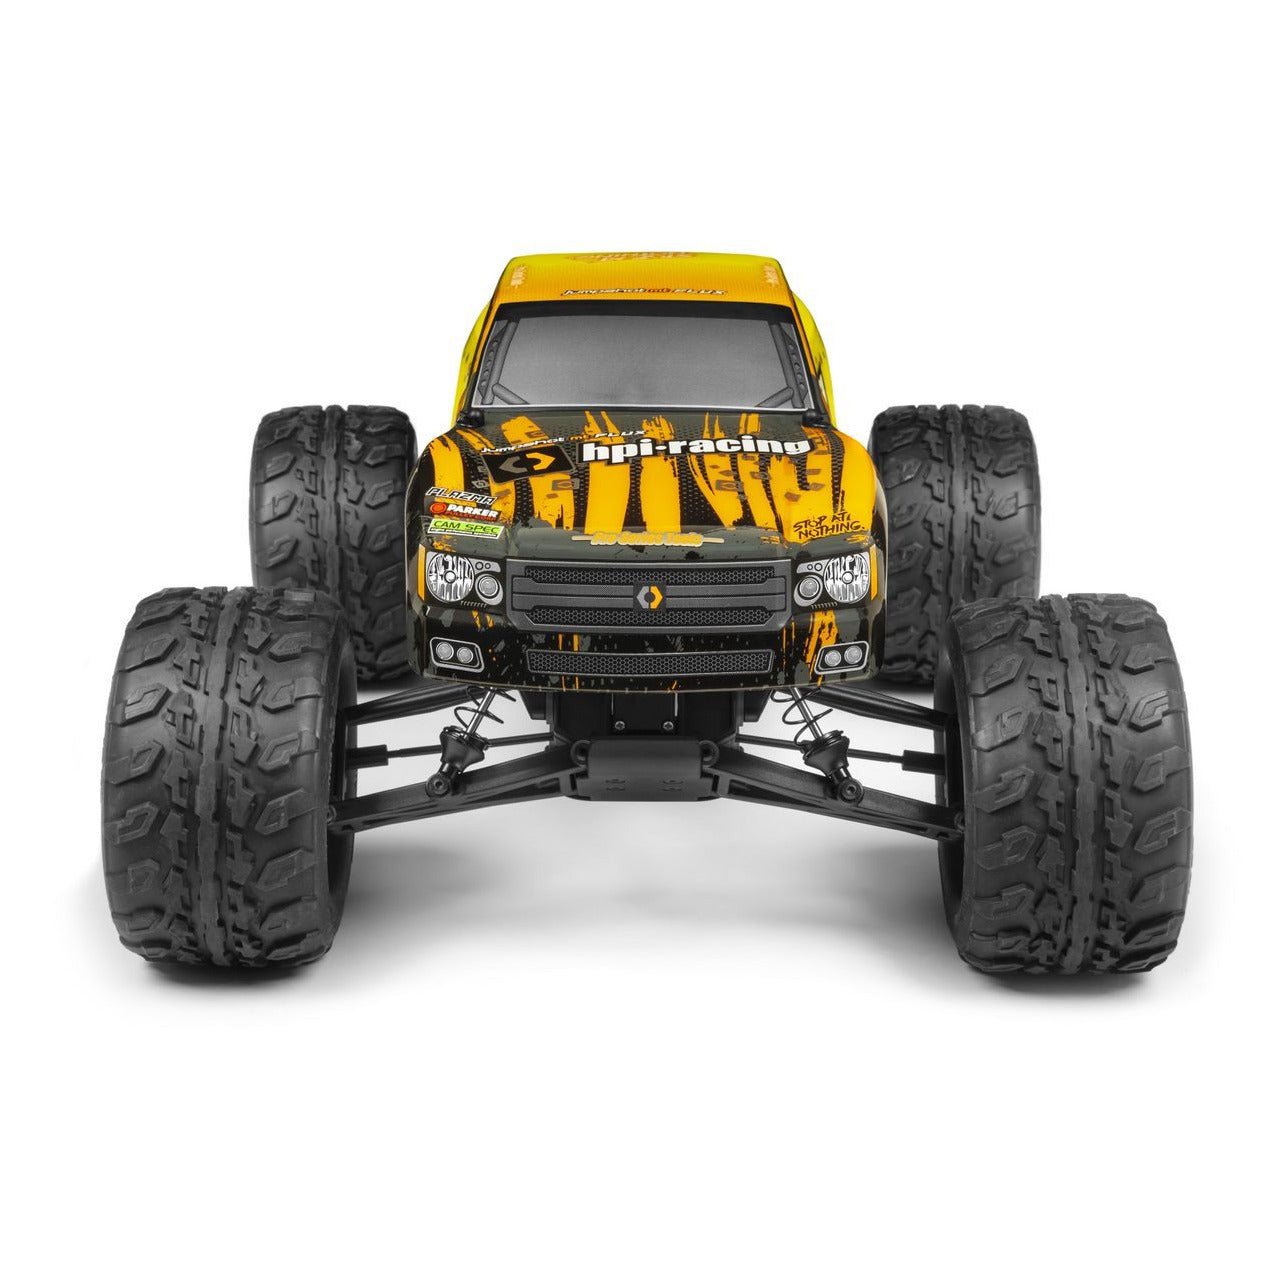 Jumpshot 1/10 Monster Truck Flux 2WD Grey / Yellow, RTR - H y p e z RC